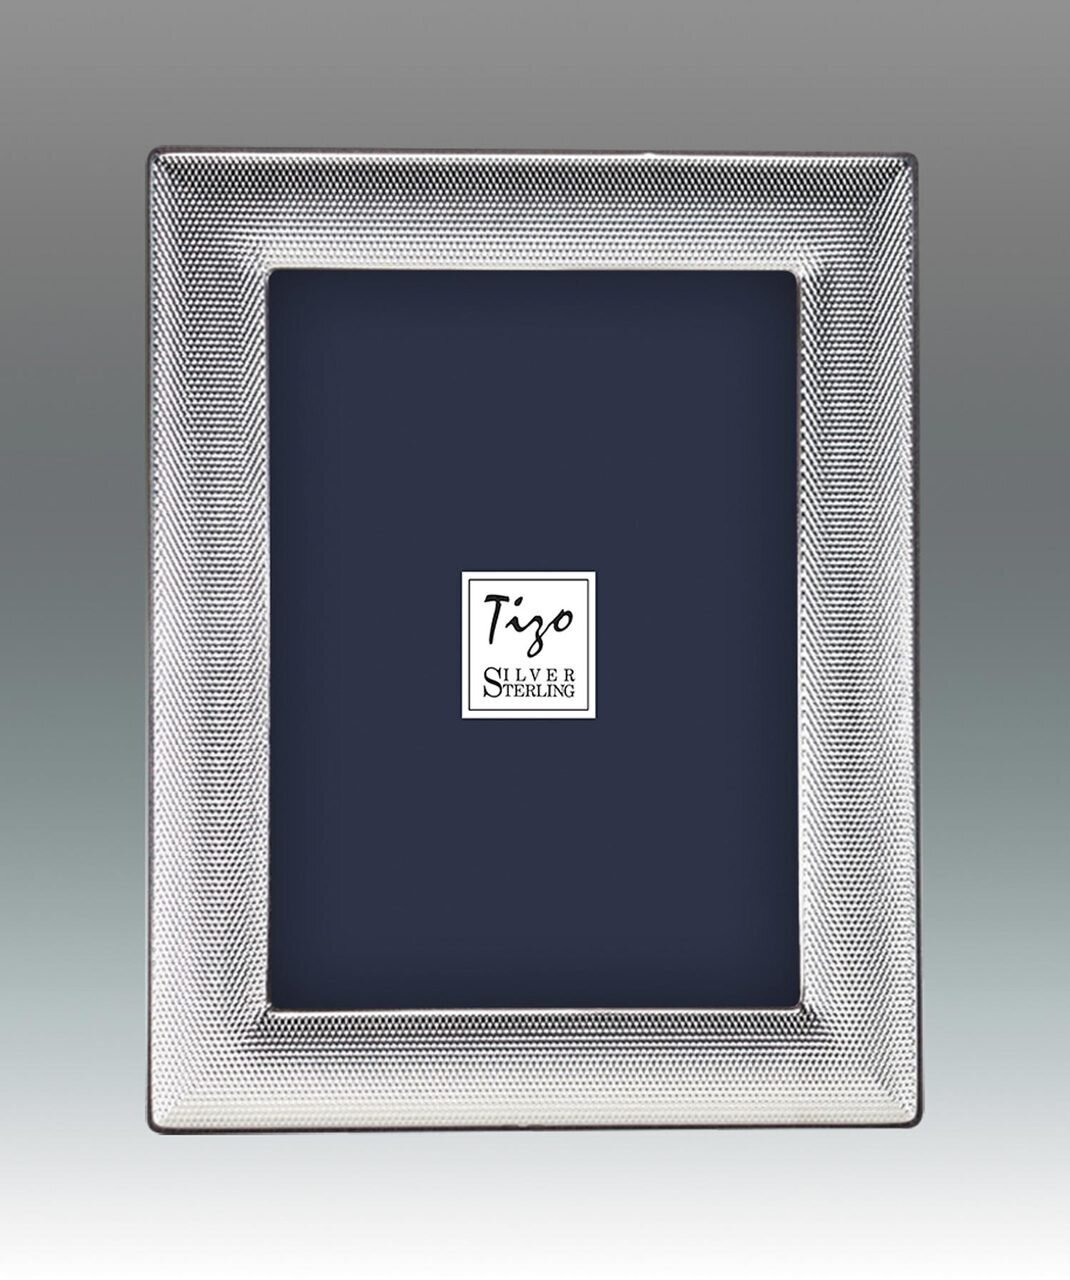 Tizo Perfect Touch 5 x 7 Inch Sterling Silver Picture Frame